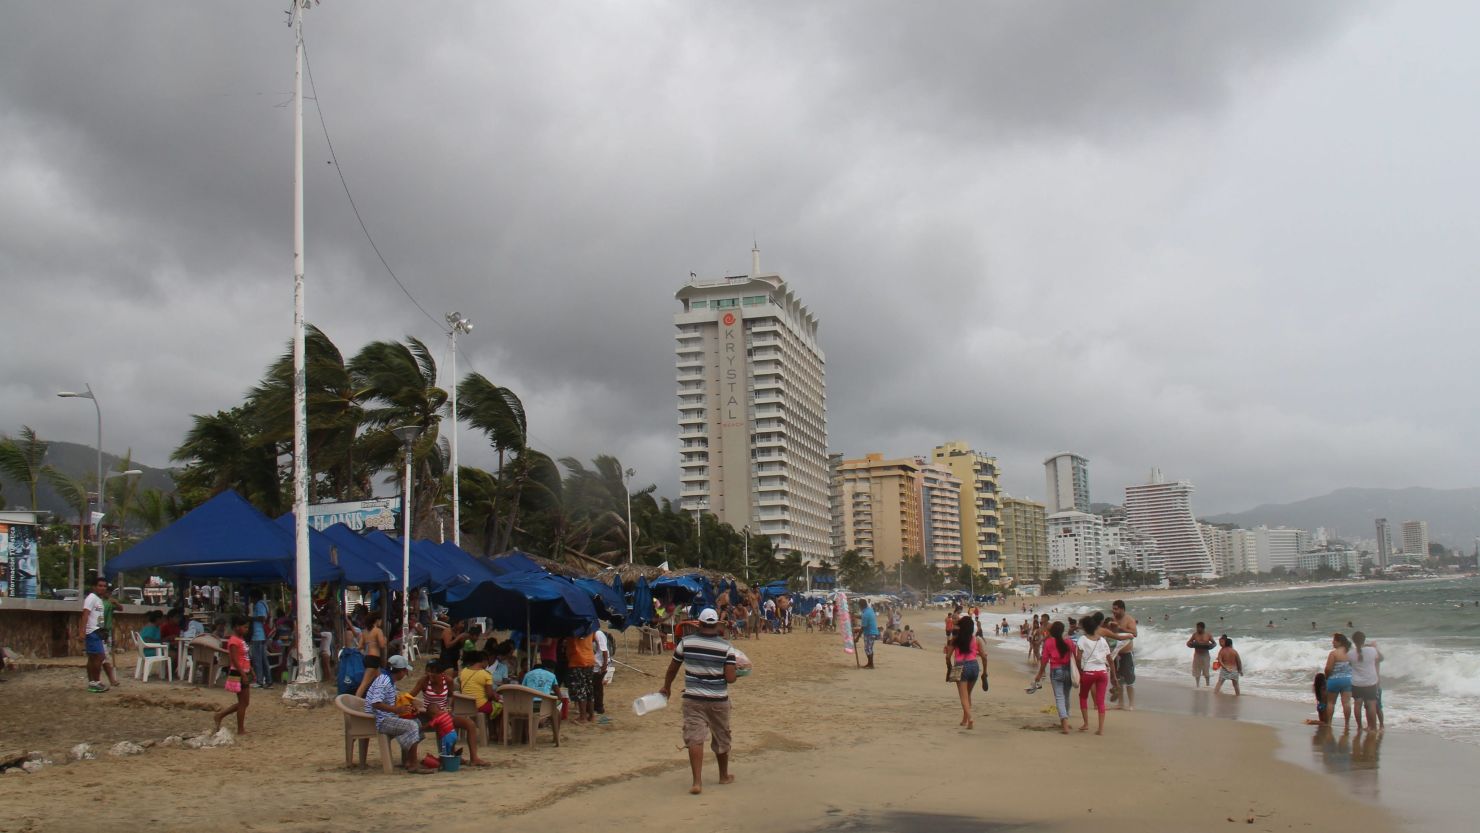 Tropical Storm Raymond brought cloudy skies to Acapulco, Mexico, on Sunday, before it strengthened into a hurricane.